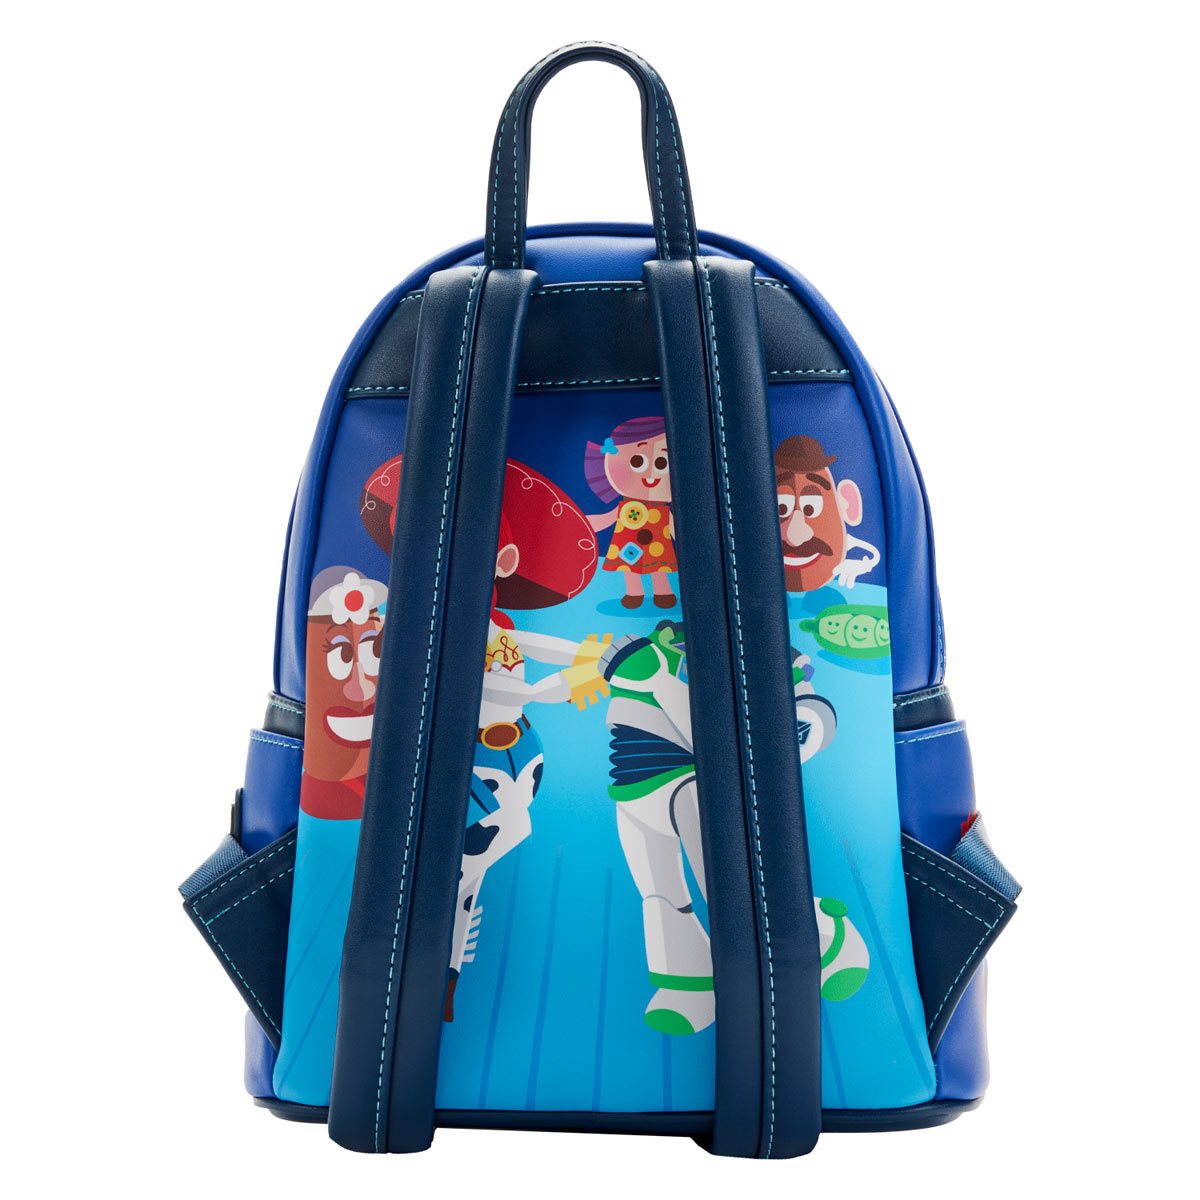 Email Protestant Dictatuur Toy Story Moments Jessie and Buzz Lightyear Mini-Backpack